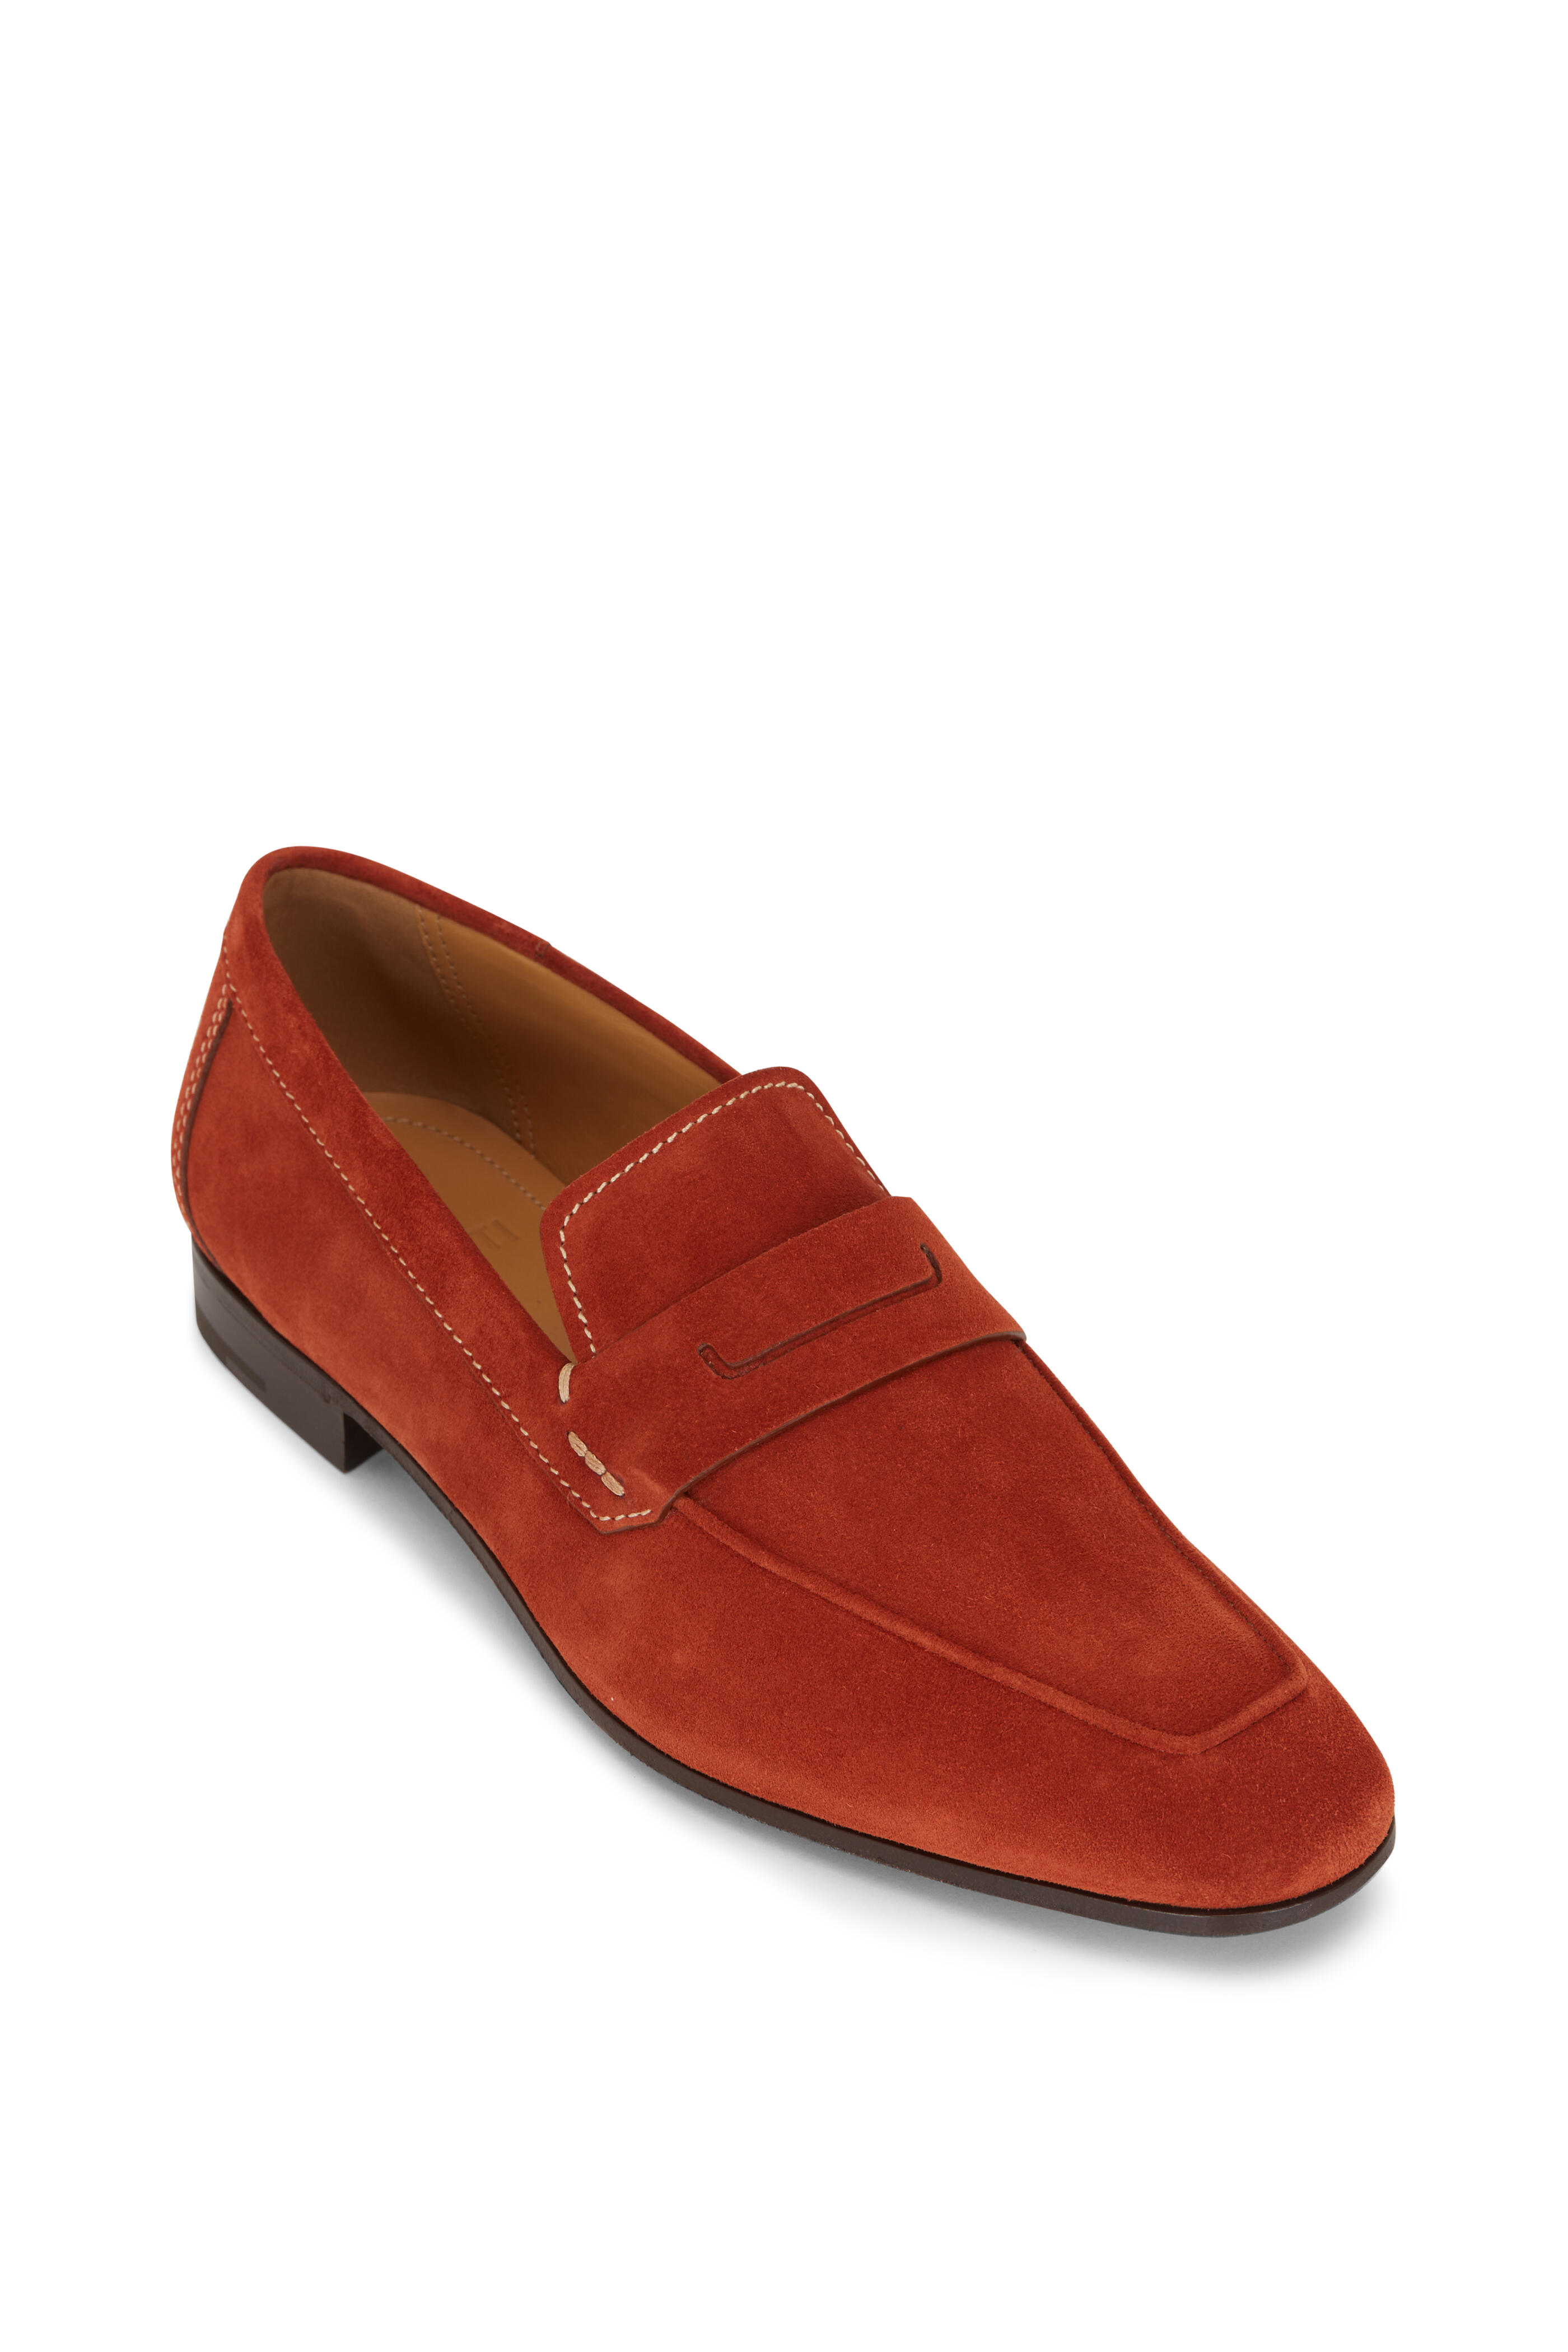 Berluti - Sporty Terracotta Suede Loafer | Mitchell Stores